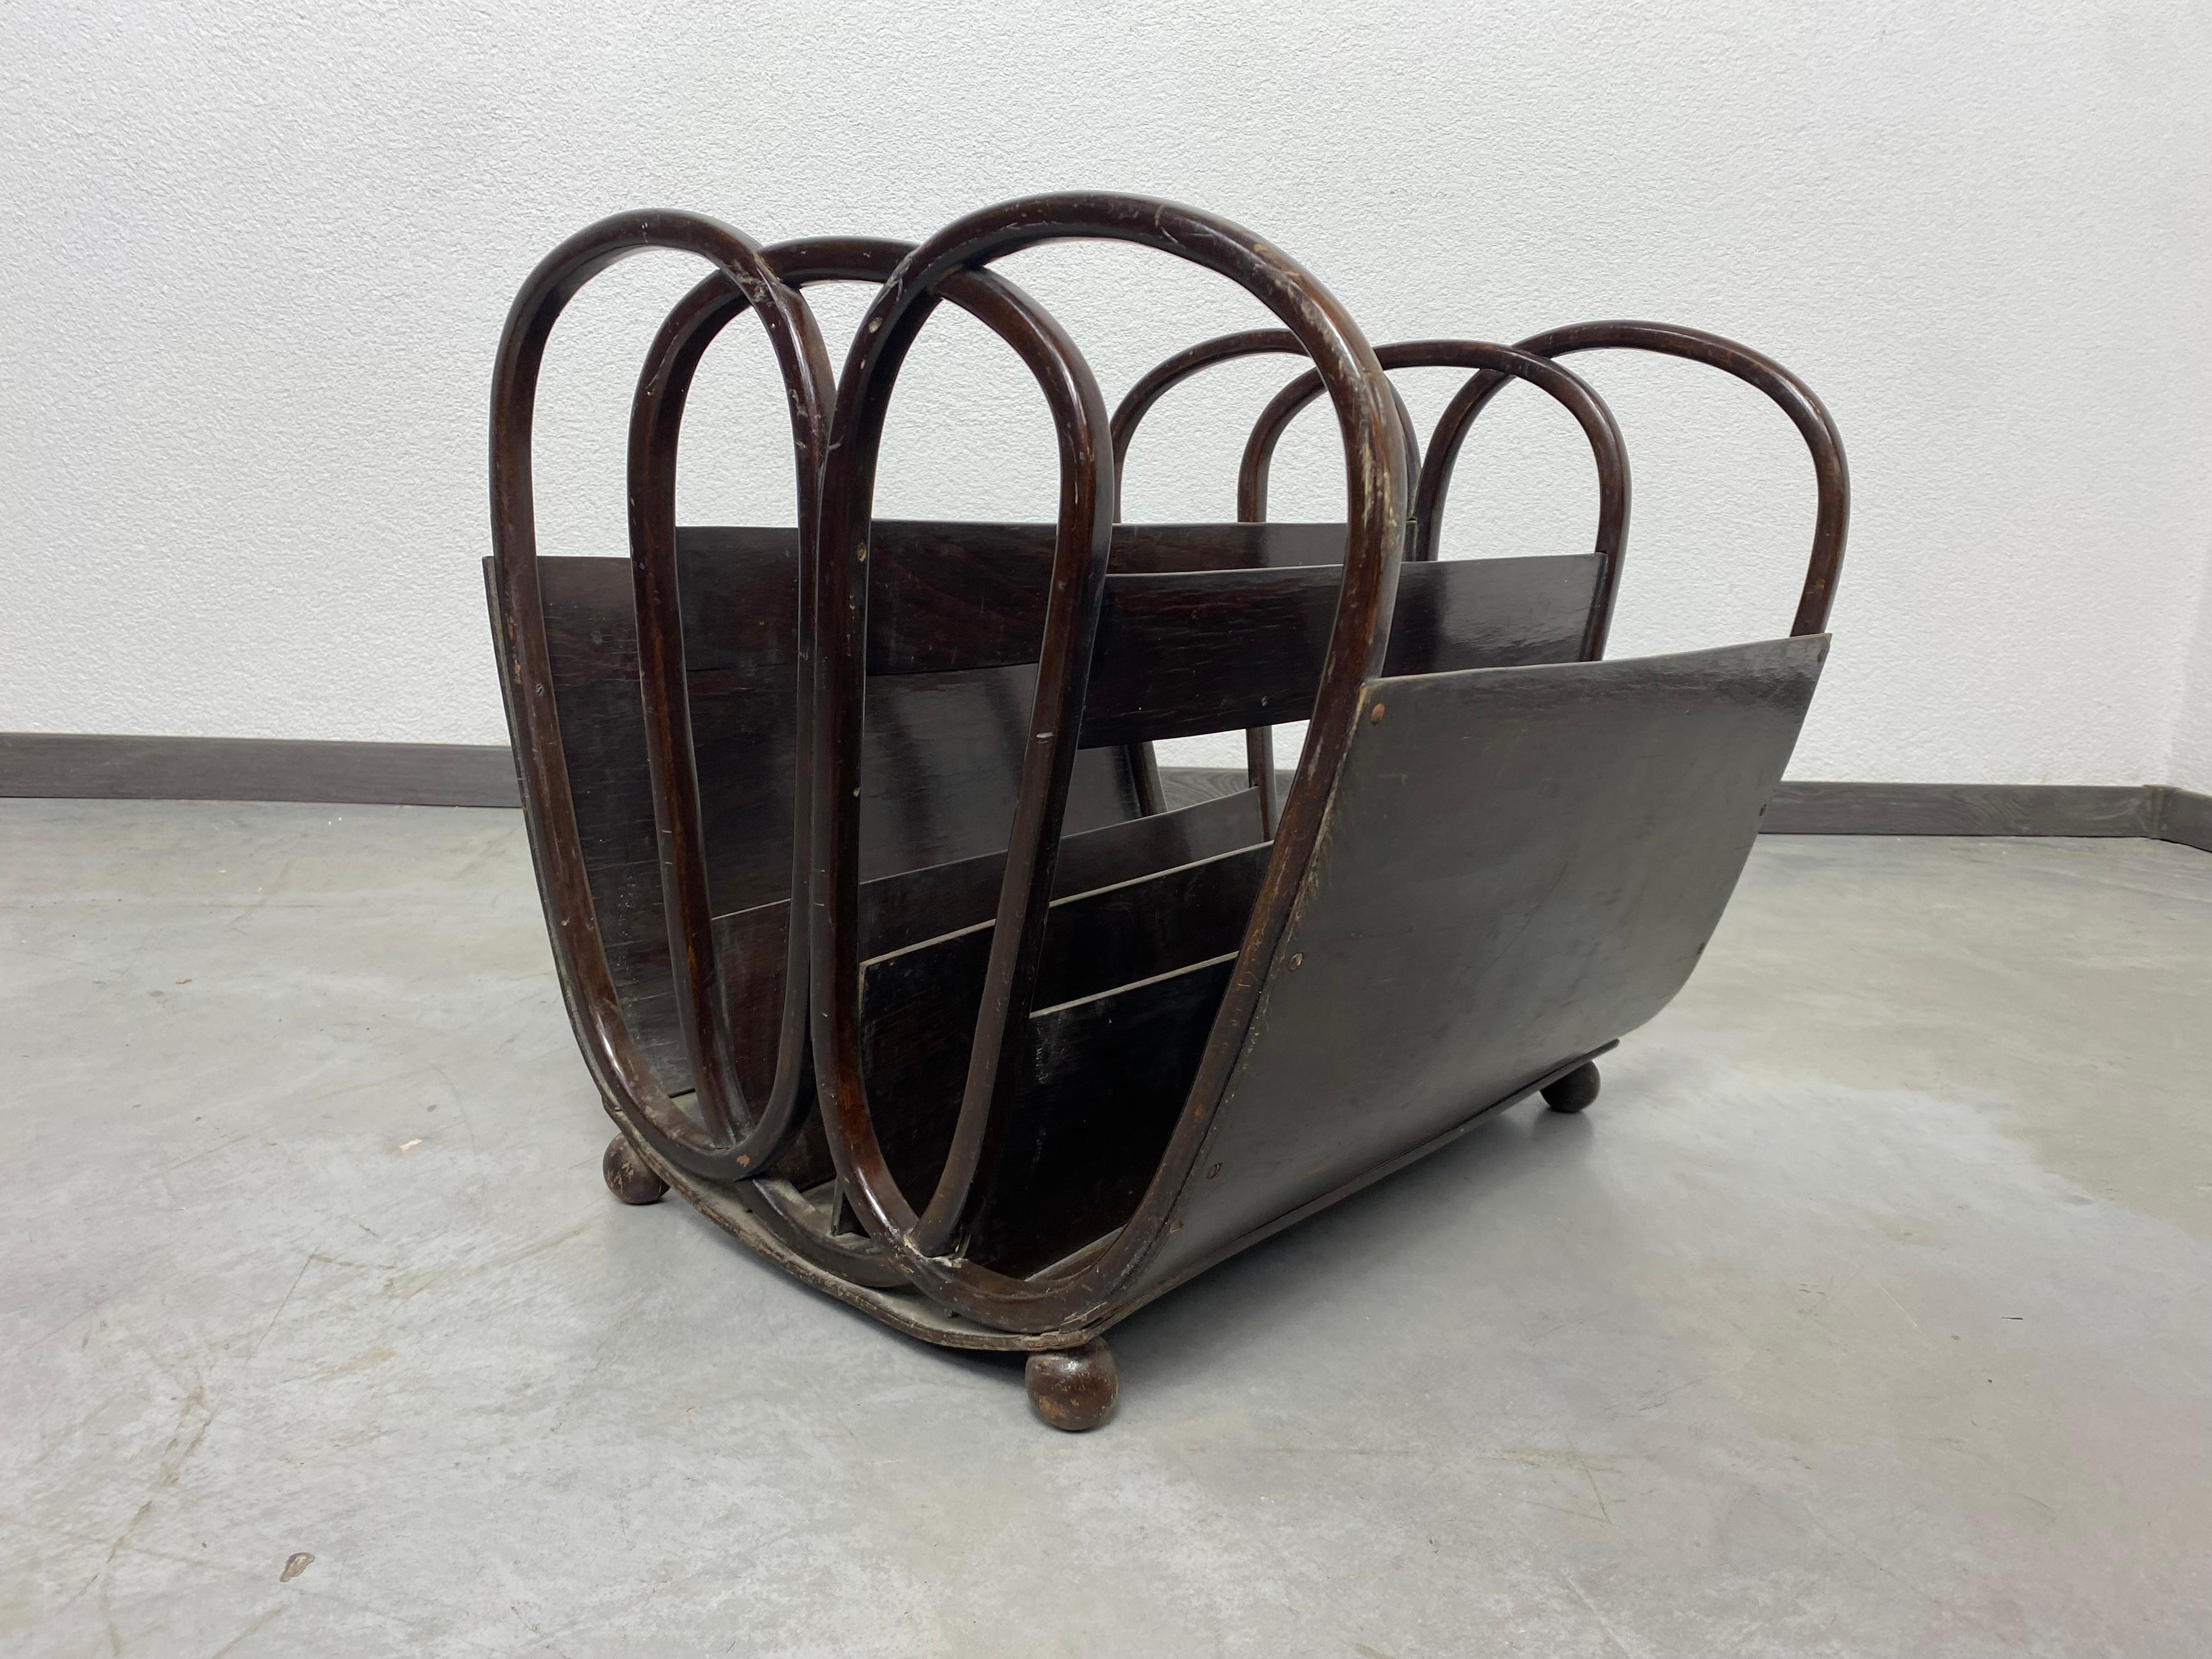 Magazine holder no.1069 by Koloman Moser for J&J Kohn in very nice original condition with signs of use.